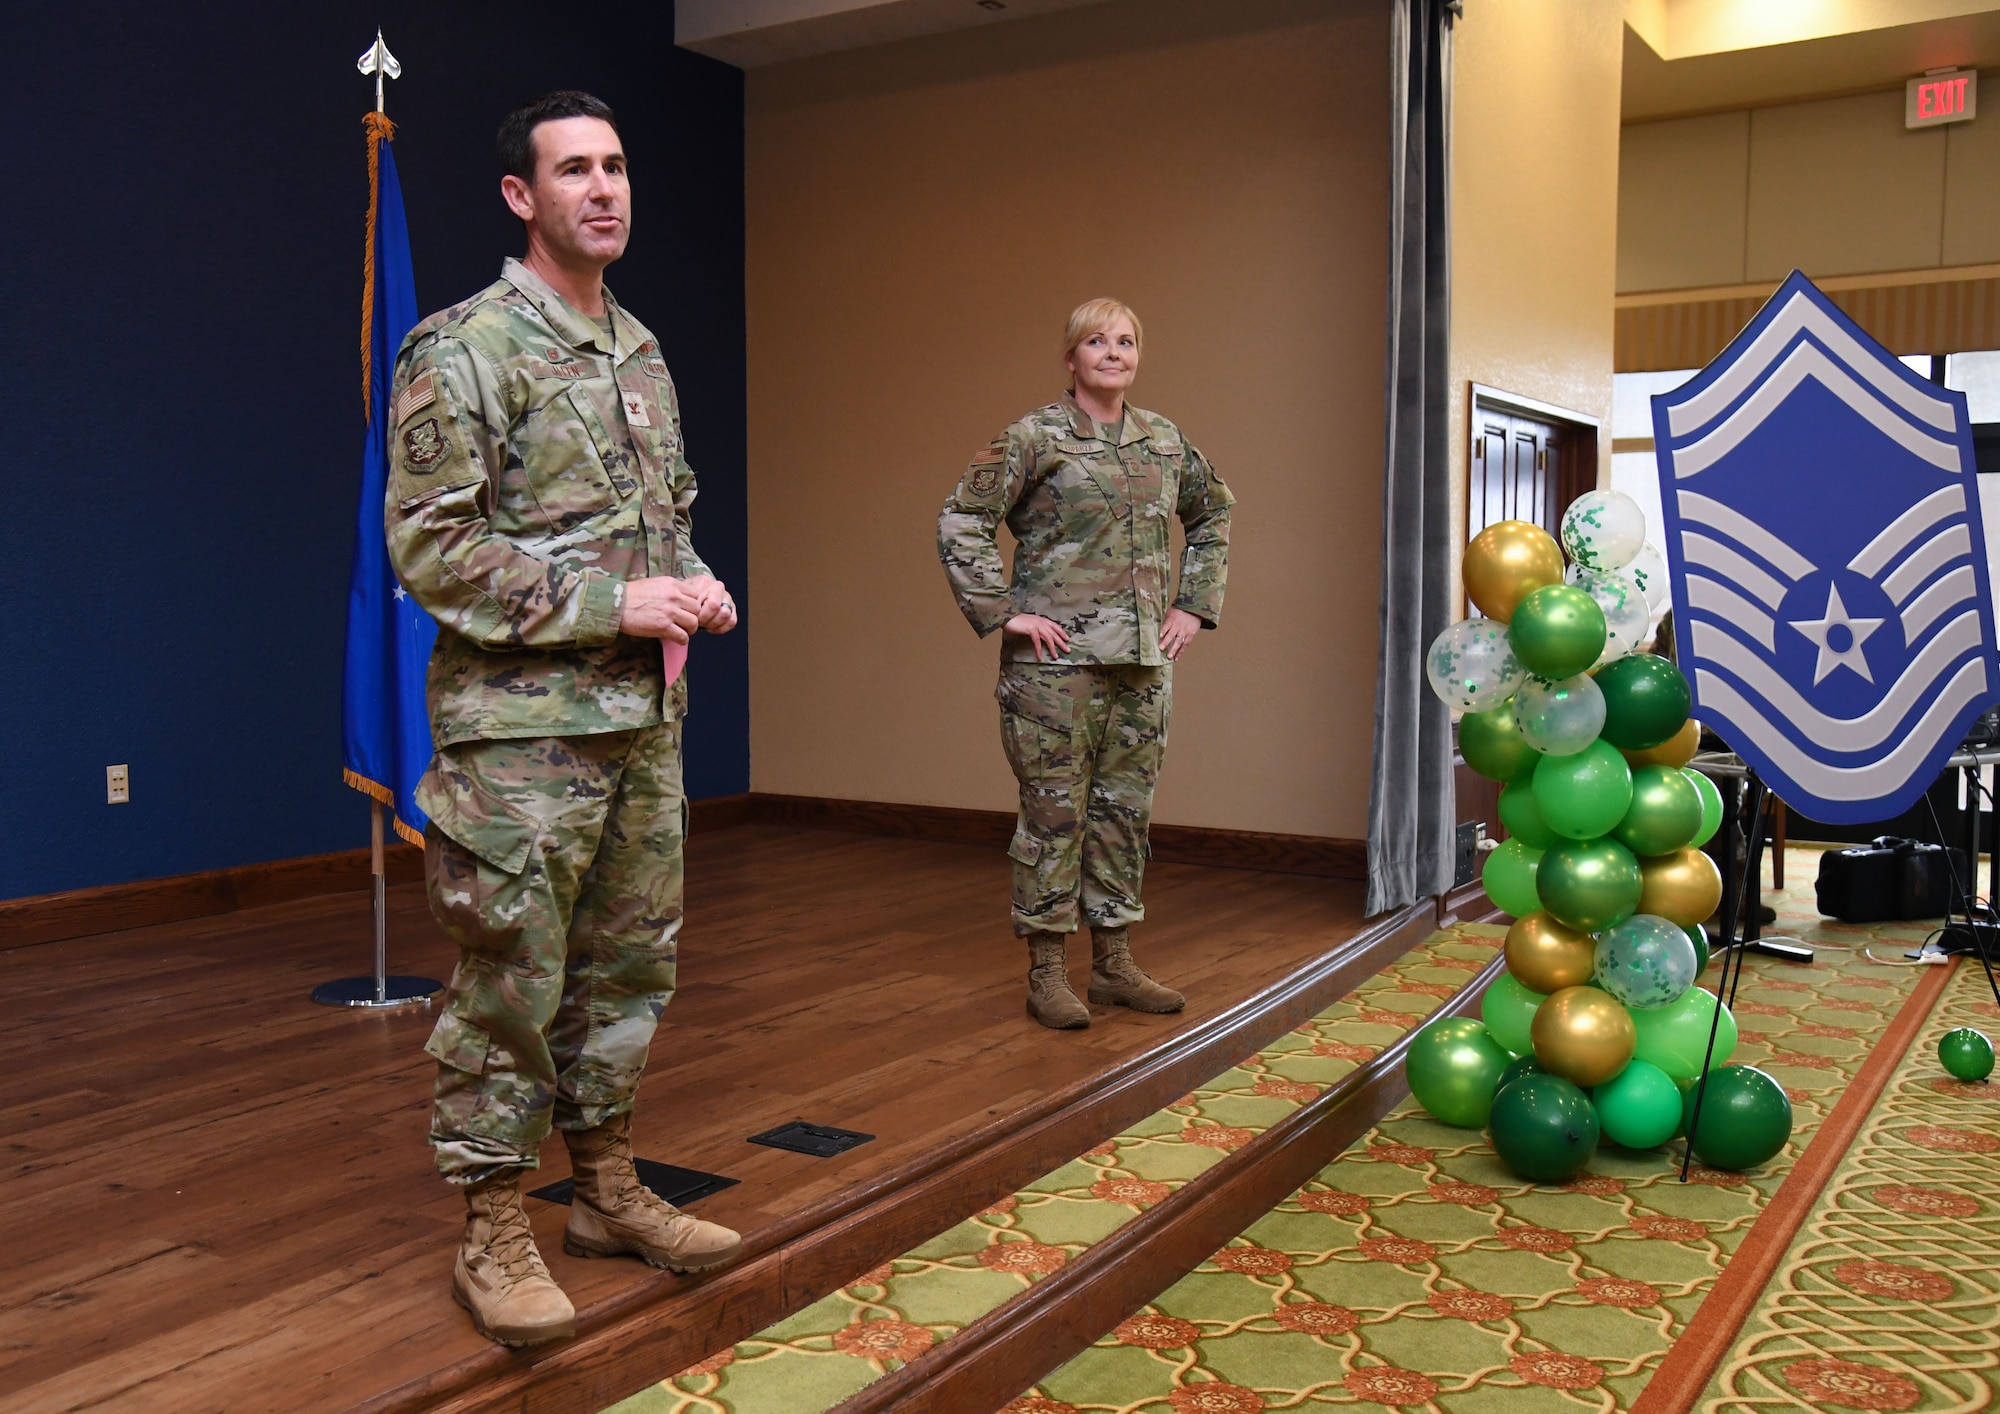 U.S. Air Force Col. Jason Allen, 81st Training Wing commander, delivers remarks while Chief Master Sgt. Sarah Esparza, 81st TRW command chief, stands by during the Senior Master Sergeant Promotion Release Ceremony inside the Bay Breeze Event Center at Keesler Air Force Base, Mississippi, March 17, 2023.